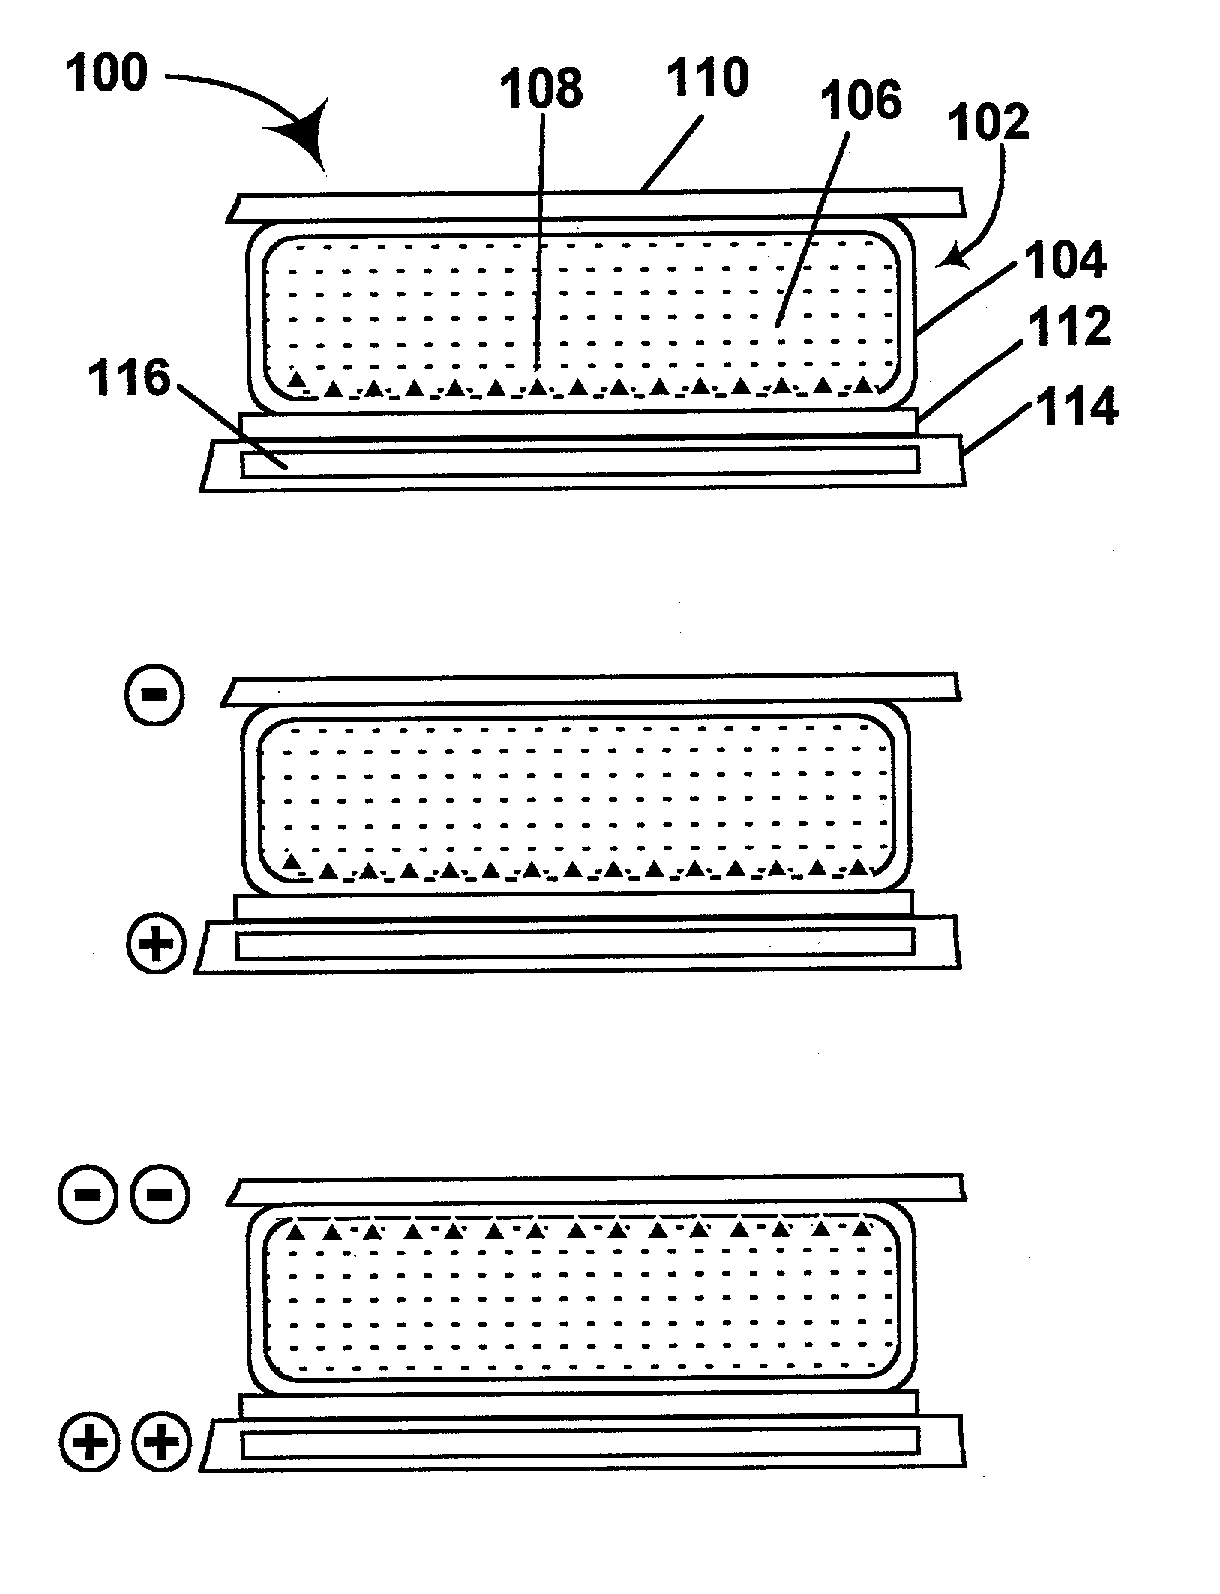 Electrophoretic displays containing magnetic particles